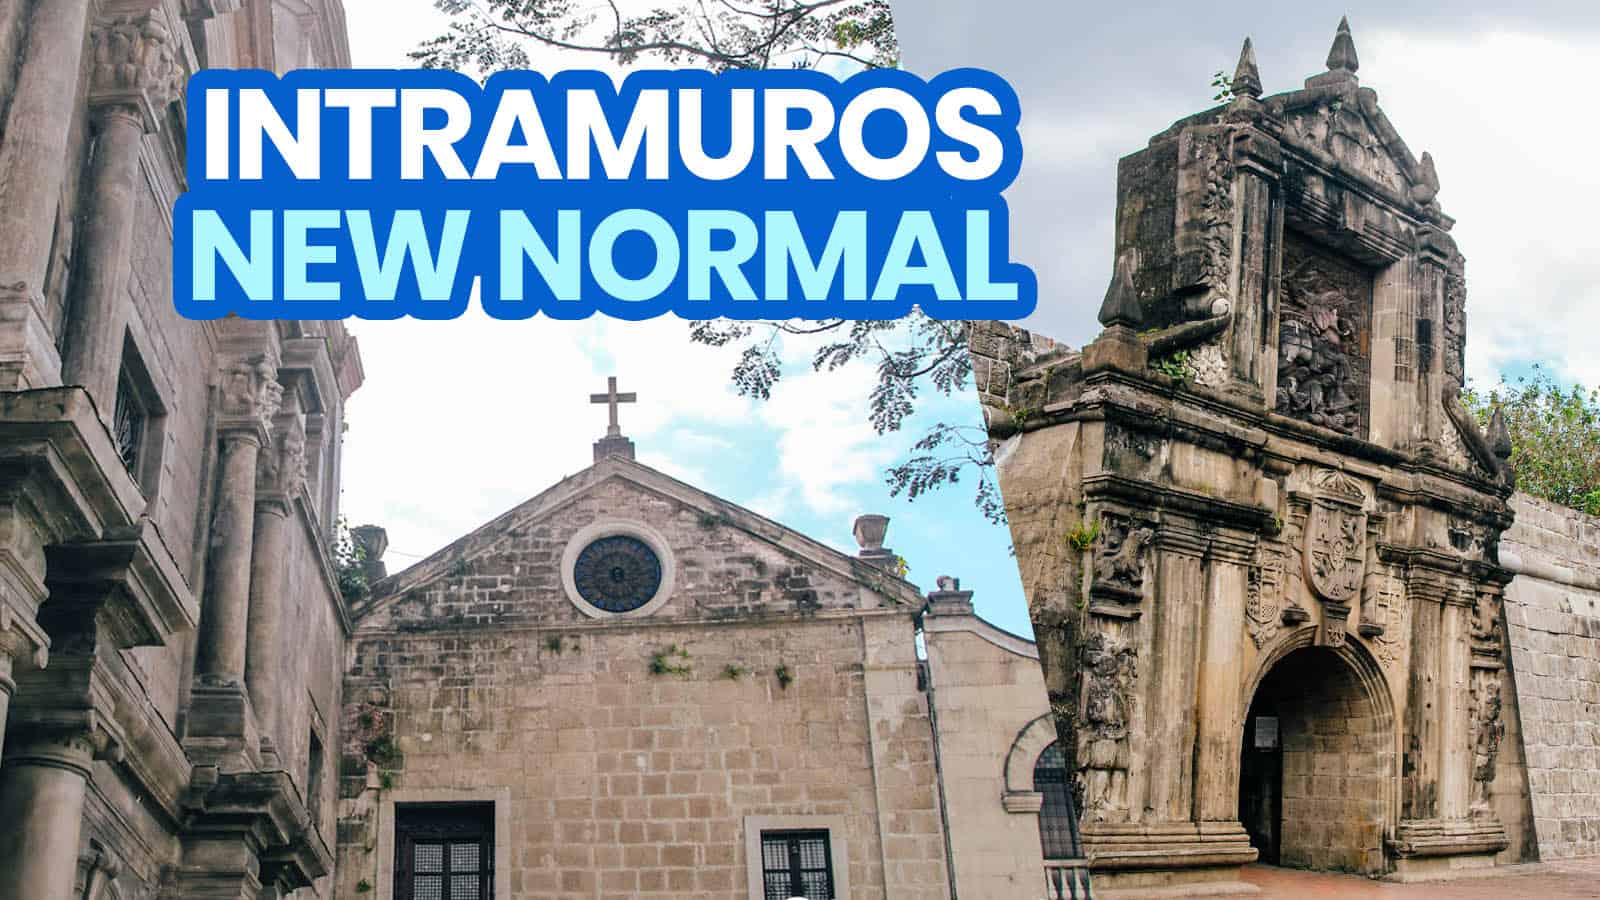 INTRAMUROS: New Normal Guidelines, Entrance Fees, Operating Hours